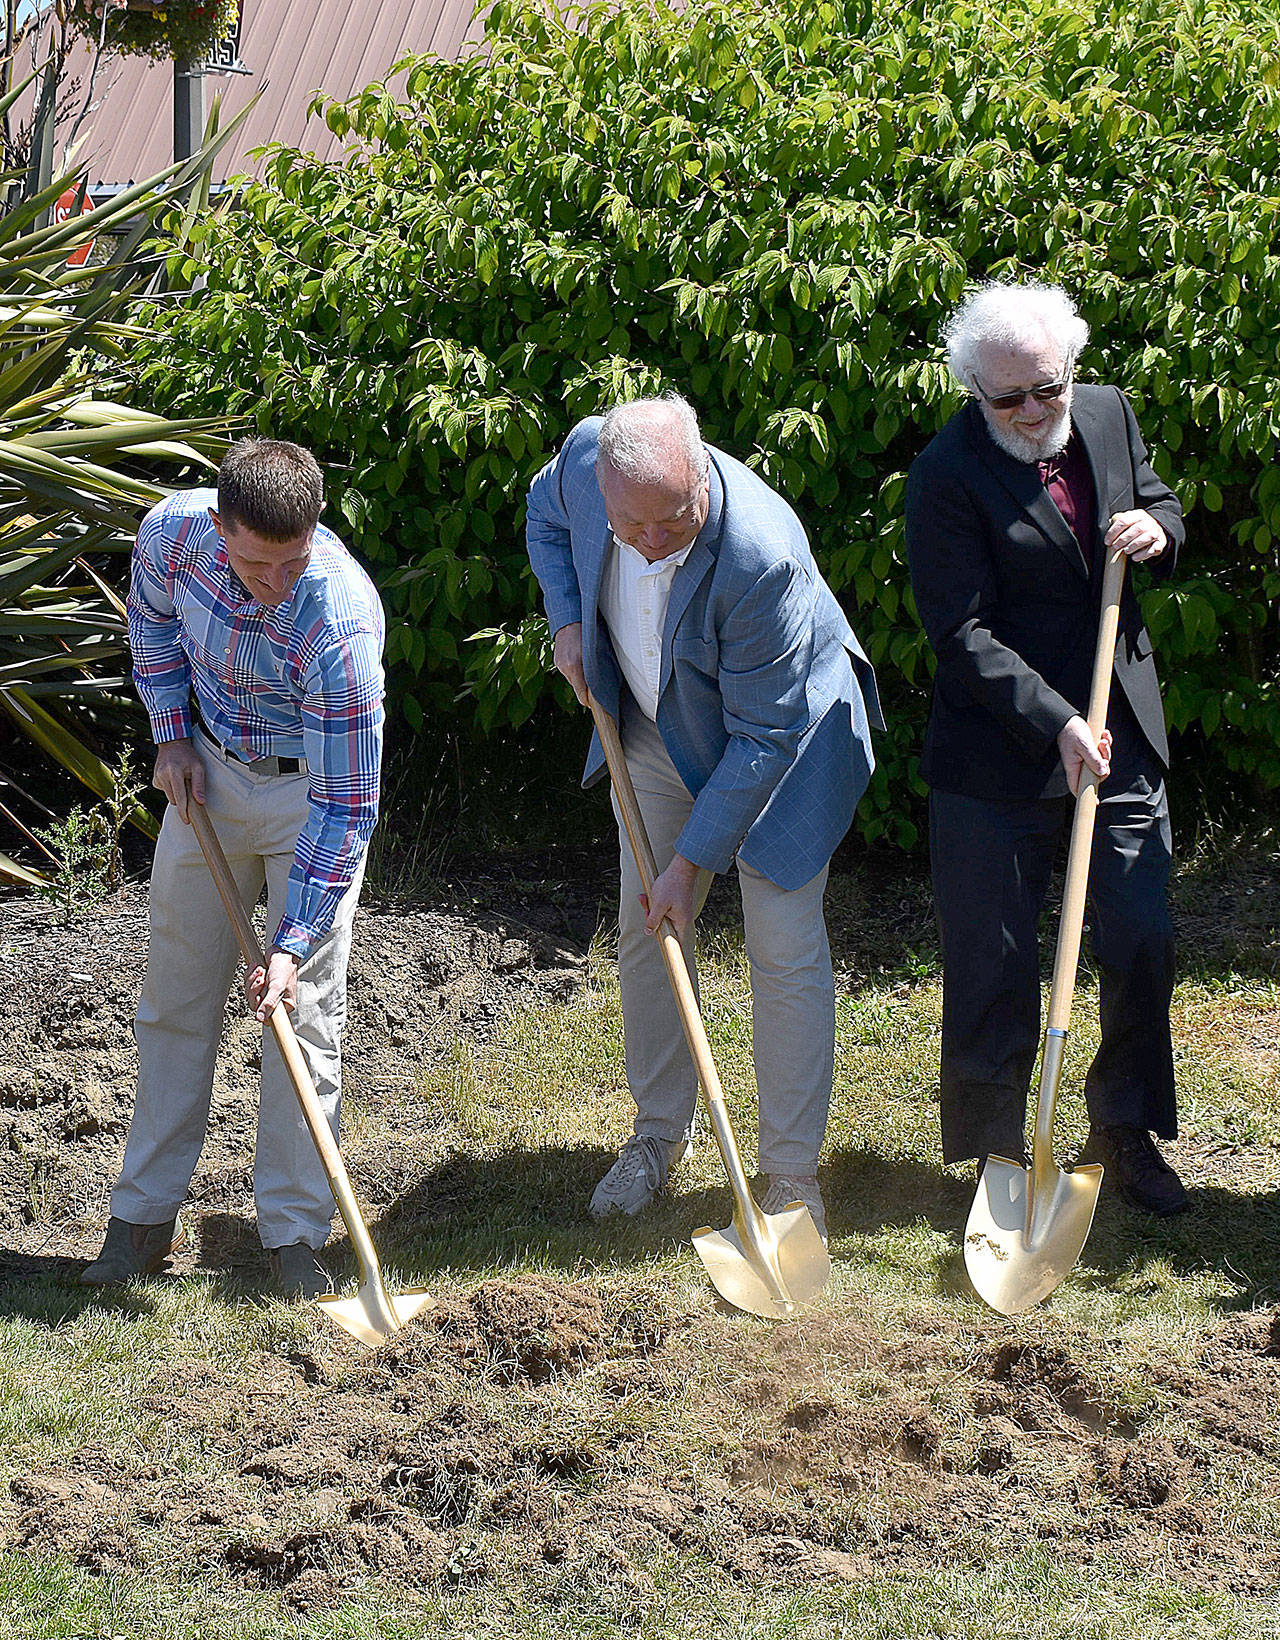 DAN HAMMOCK | THE DAILY WORLD 
From left, 19th District Representatives Joel McEntire and Jim Walsh and Raymond Mayor Tony Nordin use golden shovels to break ground Thursday at the site of the future Willapa Center in Raymond.